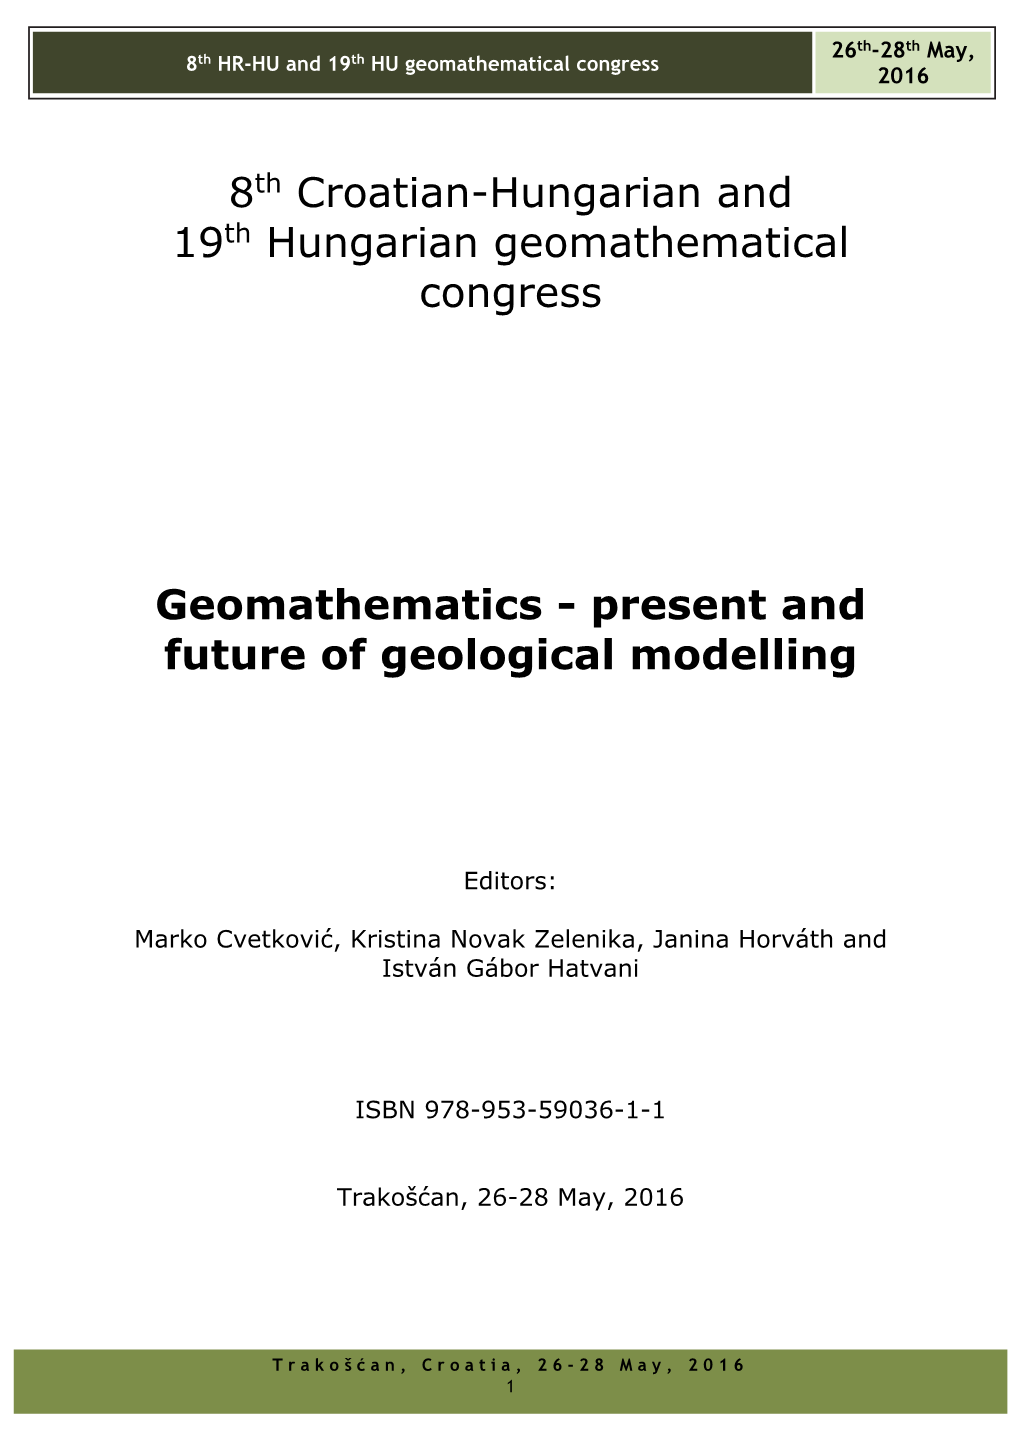 Present and Future of Geological Modelling